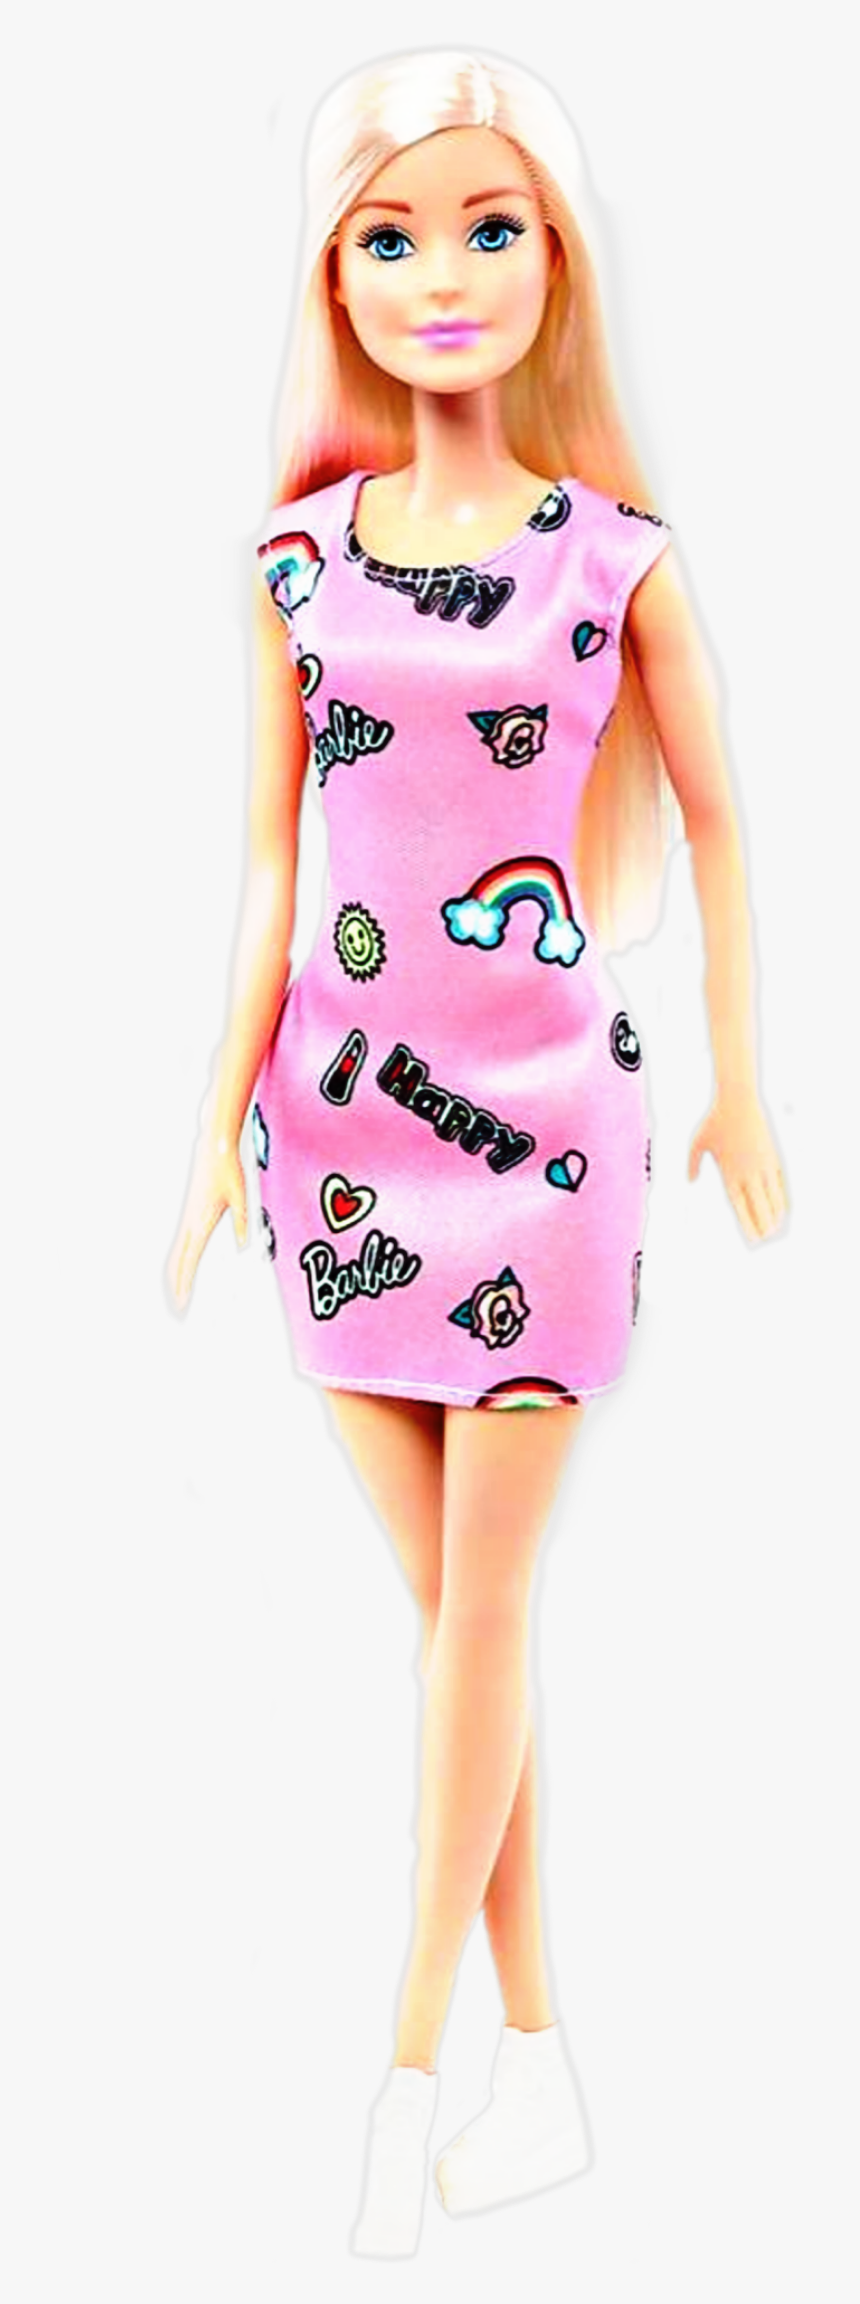 #barbie #doll #girly #playful - Mattel Barbie Chic Doll In Dress Pink, HD Png Download, Free Download